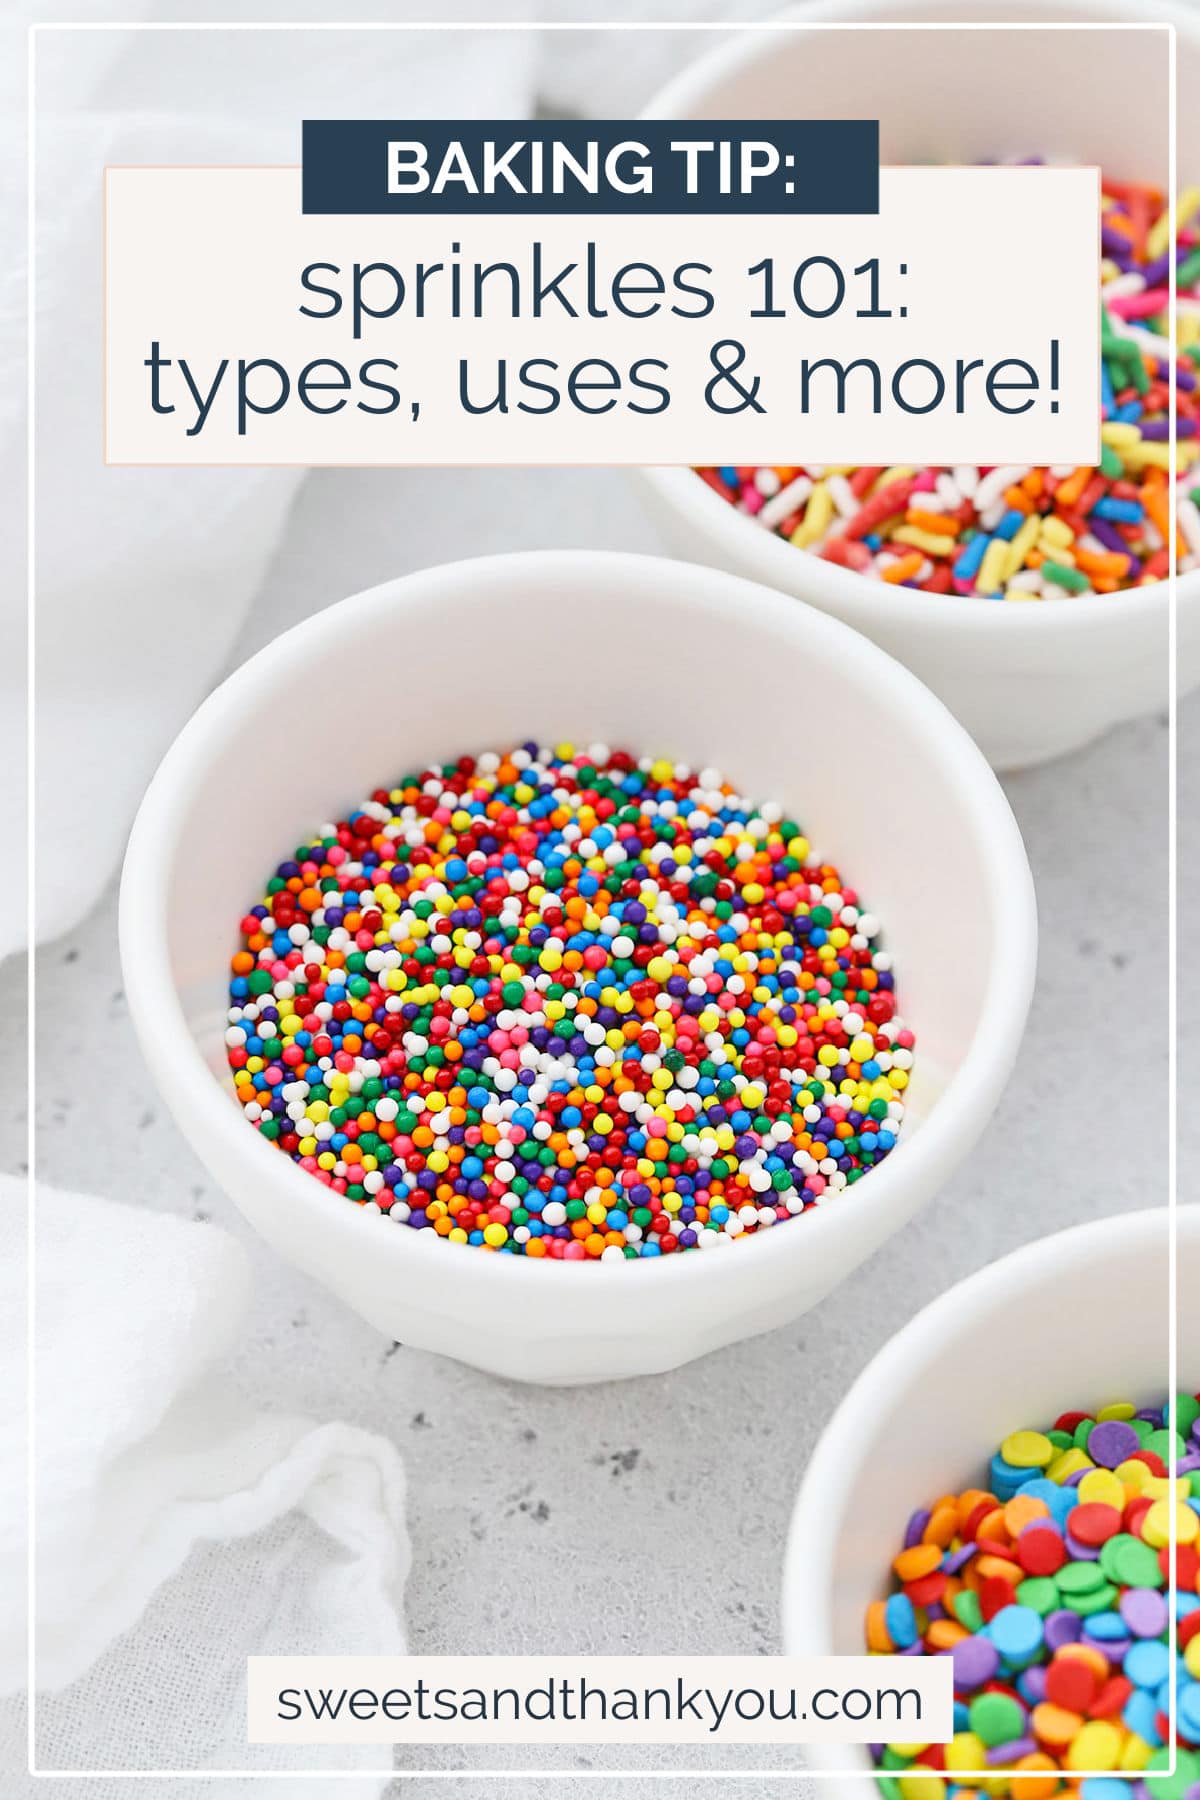 Sprinkles 101 - I'm taking you to sprinkle school today! We'll learn what the different kinds of sprinkles are, how to use them & more! // Types of Sprinkles // Funfetti Sprinkles // Cake Decorating Tips // Cookie Decorating Tips // Gluten Free Baking // Baking Tips #bakingtips #cakedecorating #cakeideas #cookiedecorating #glutenfreebaking #sprinkles